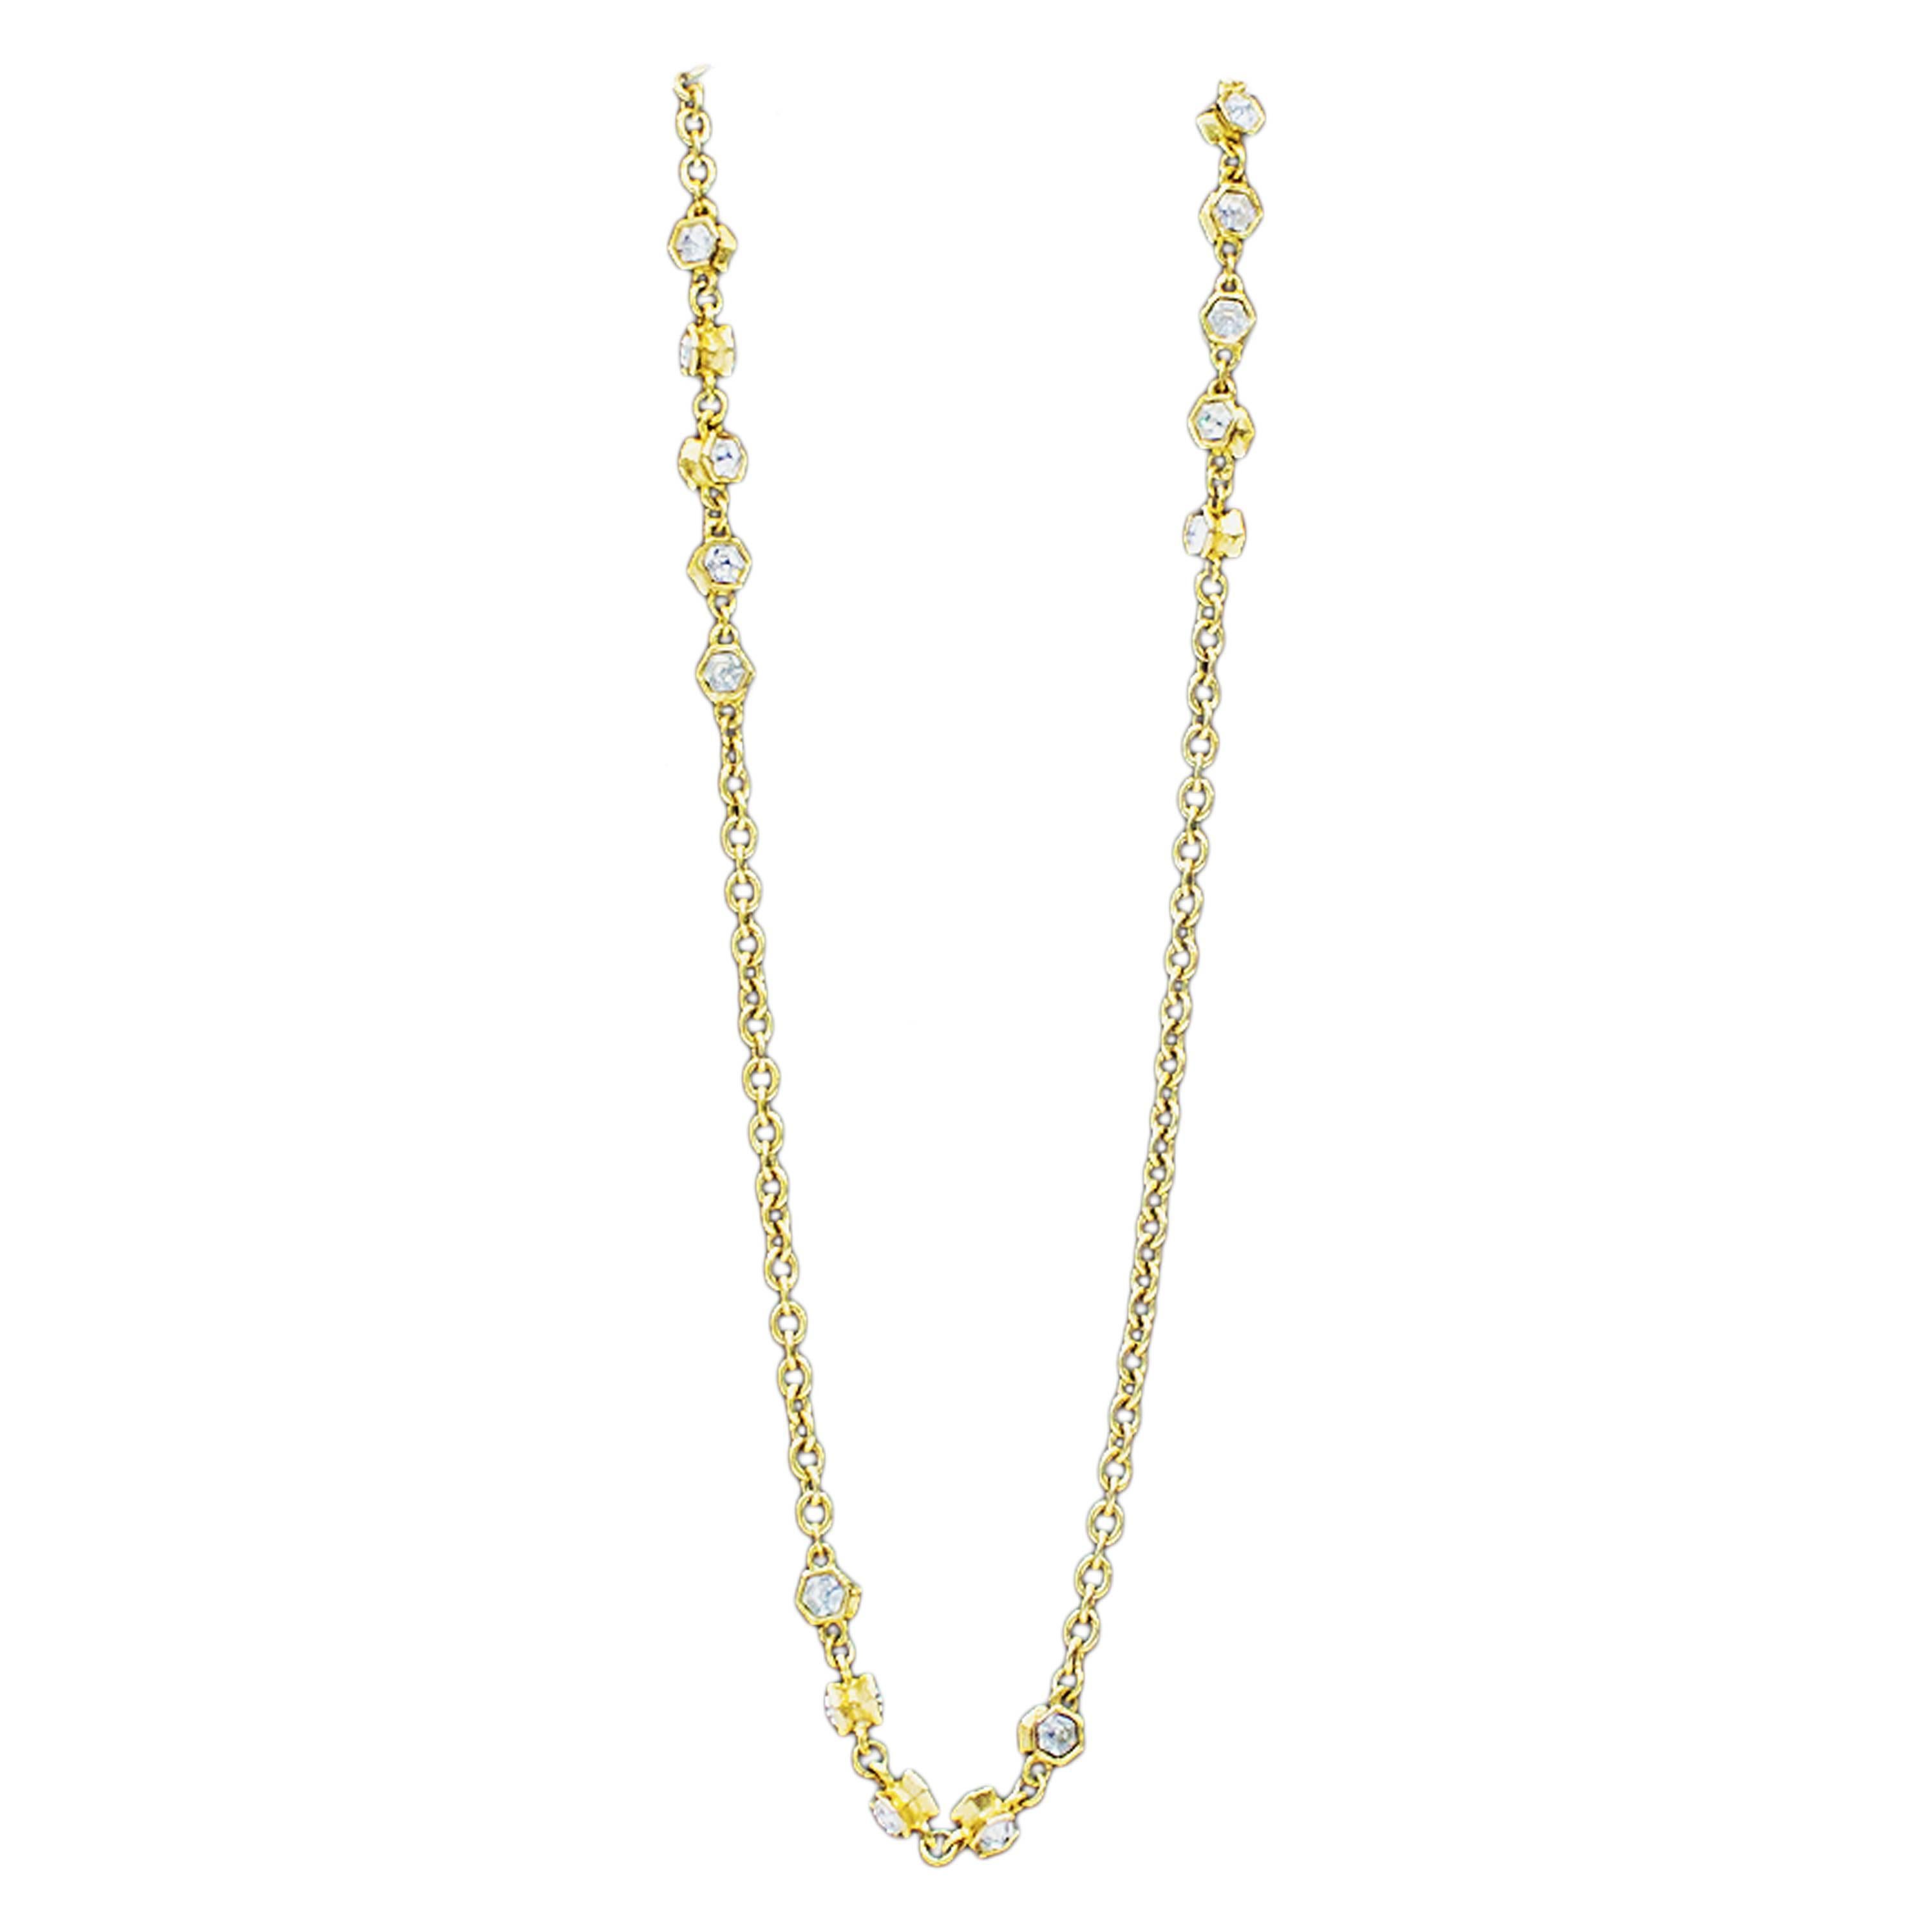 1970's Chanel Gold Chain Sautoir Necklace with Rhinestones